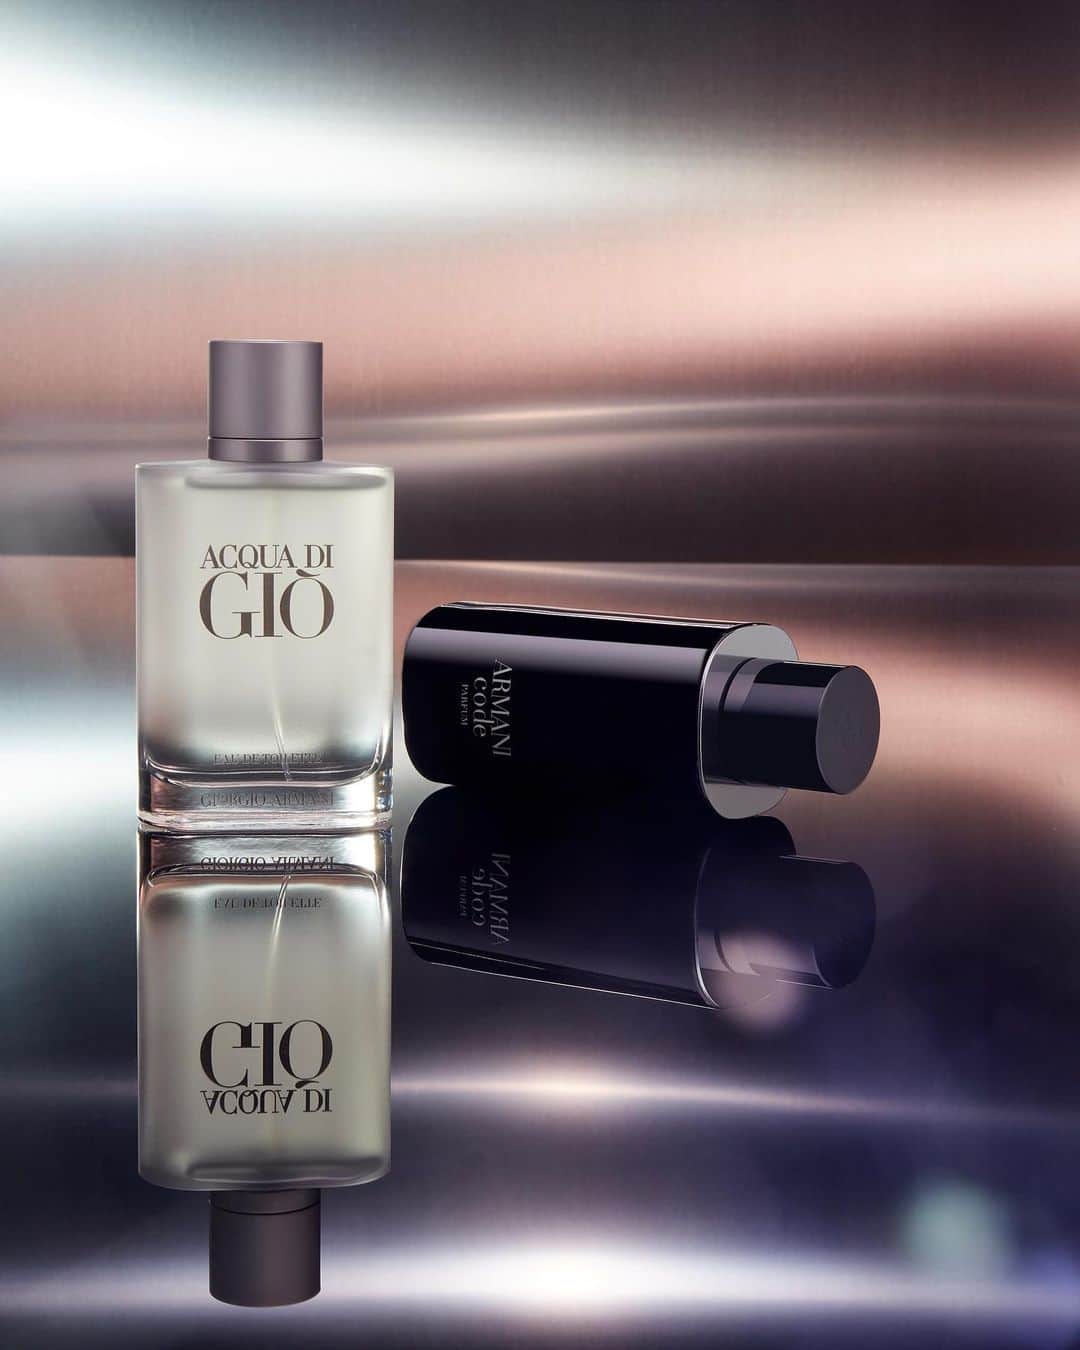 Armani Beautyのインスタグラム：「Signature scents for the Holiday Season. From the mythical and acquatic notes of ACQUA DI GIÒ EAU DE TOILETTE to the strong yet sensitive ARMANI CODE PARFUM, explore the wide range of fragrances that make the perfect gift this year.   #Armanibeauty #ArmaniGift #AcquaDiGio #ArmaniCode  #Fragrance #HolidayFragrance」